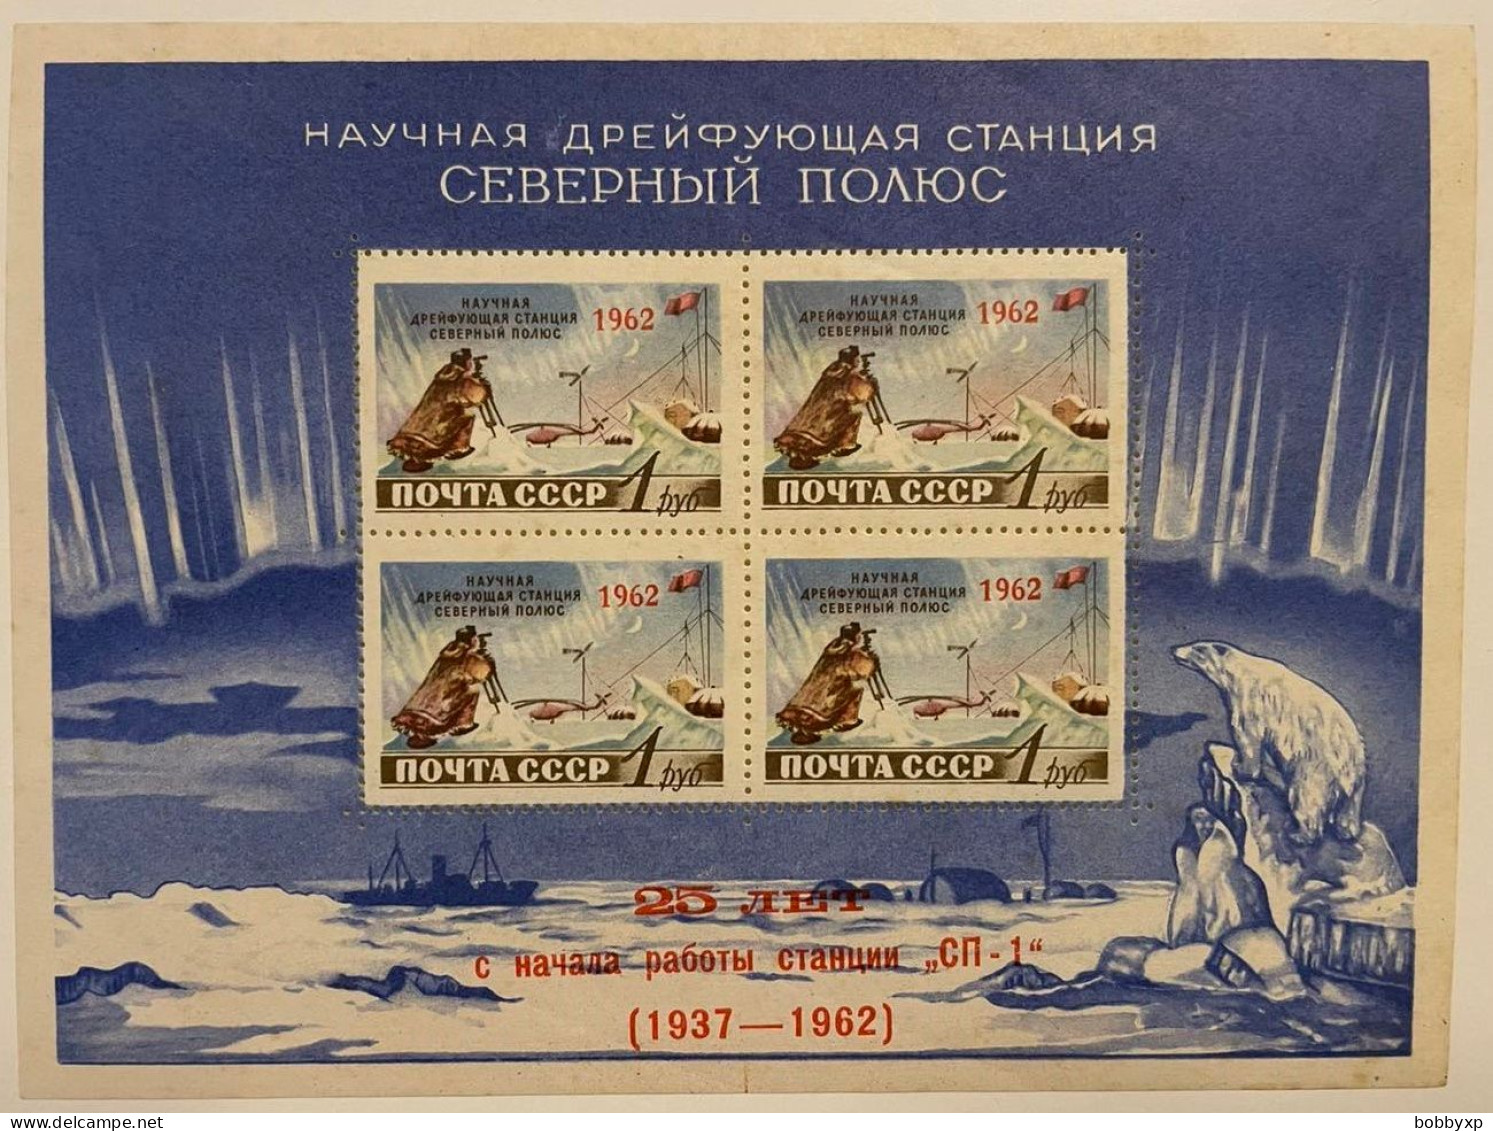 Russia. USSR 1962. Full Yearsets 148 Stamps & 3 Souvenir Sheet. MNH - Années Complètes